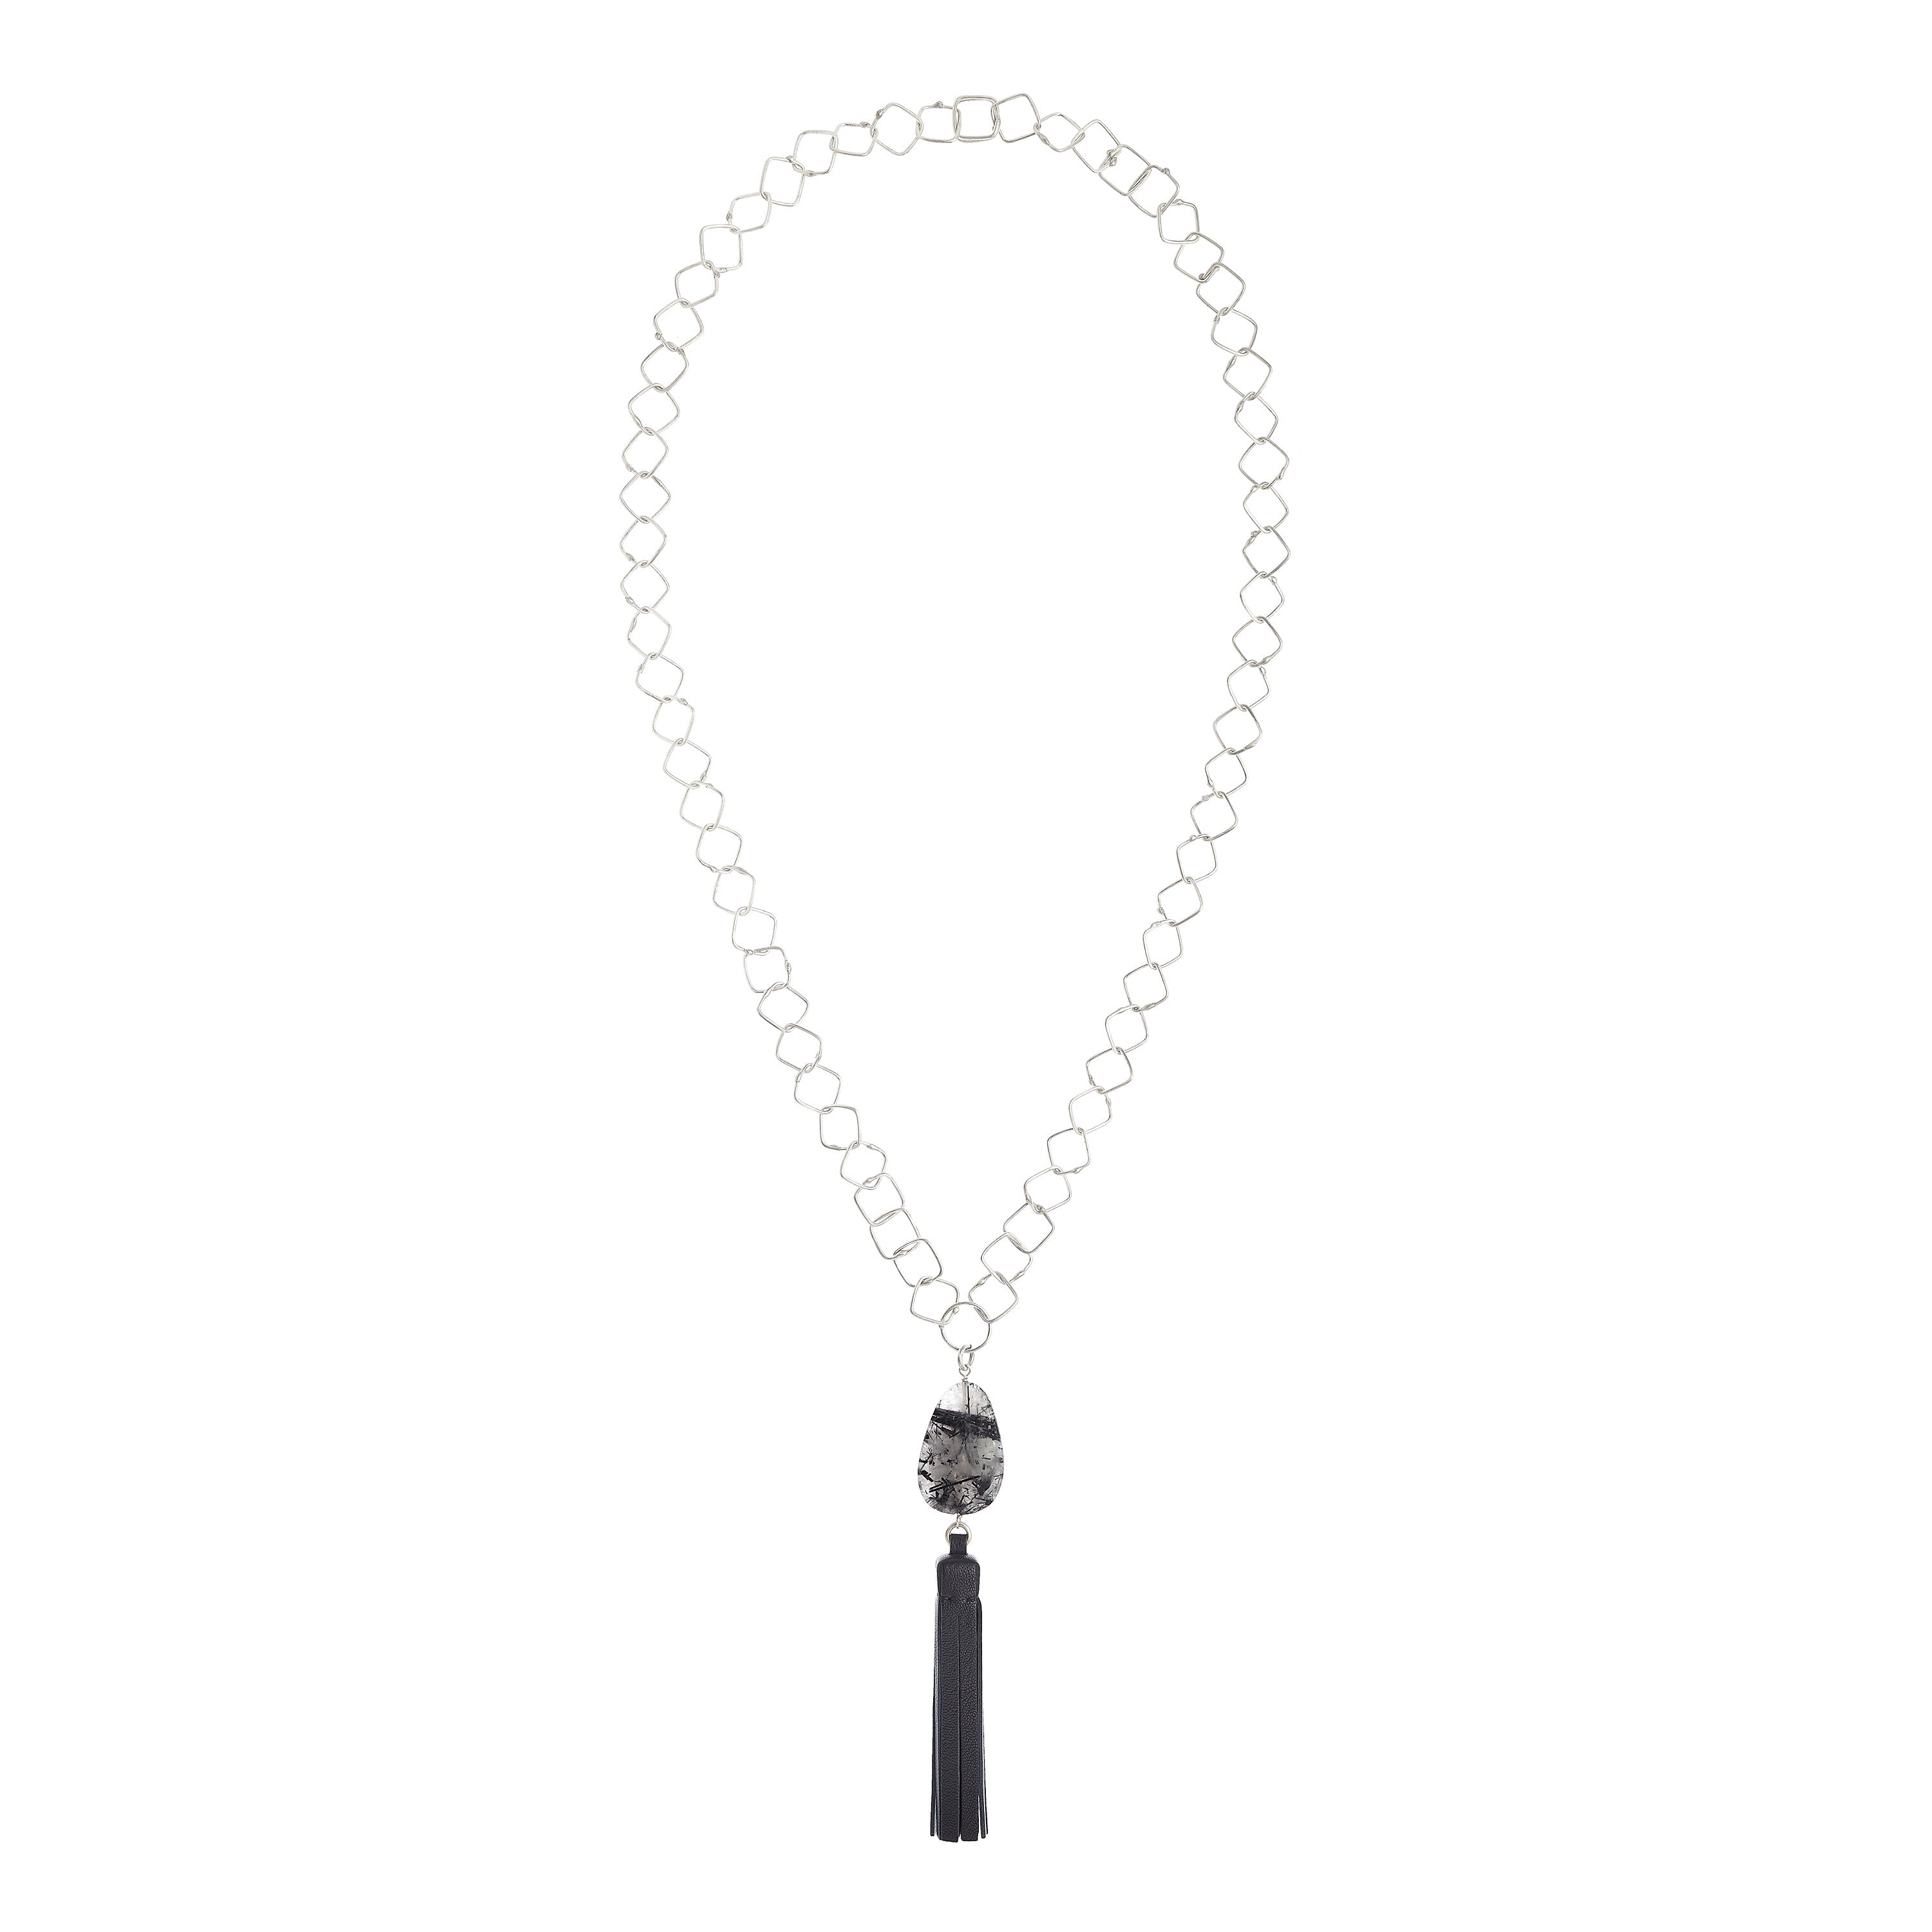 Tassel “Square” Necklace with Black Leather and Quartz